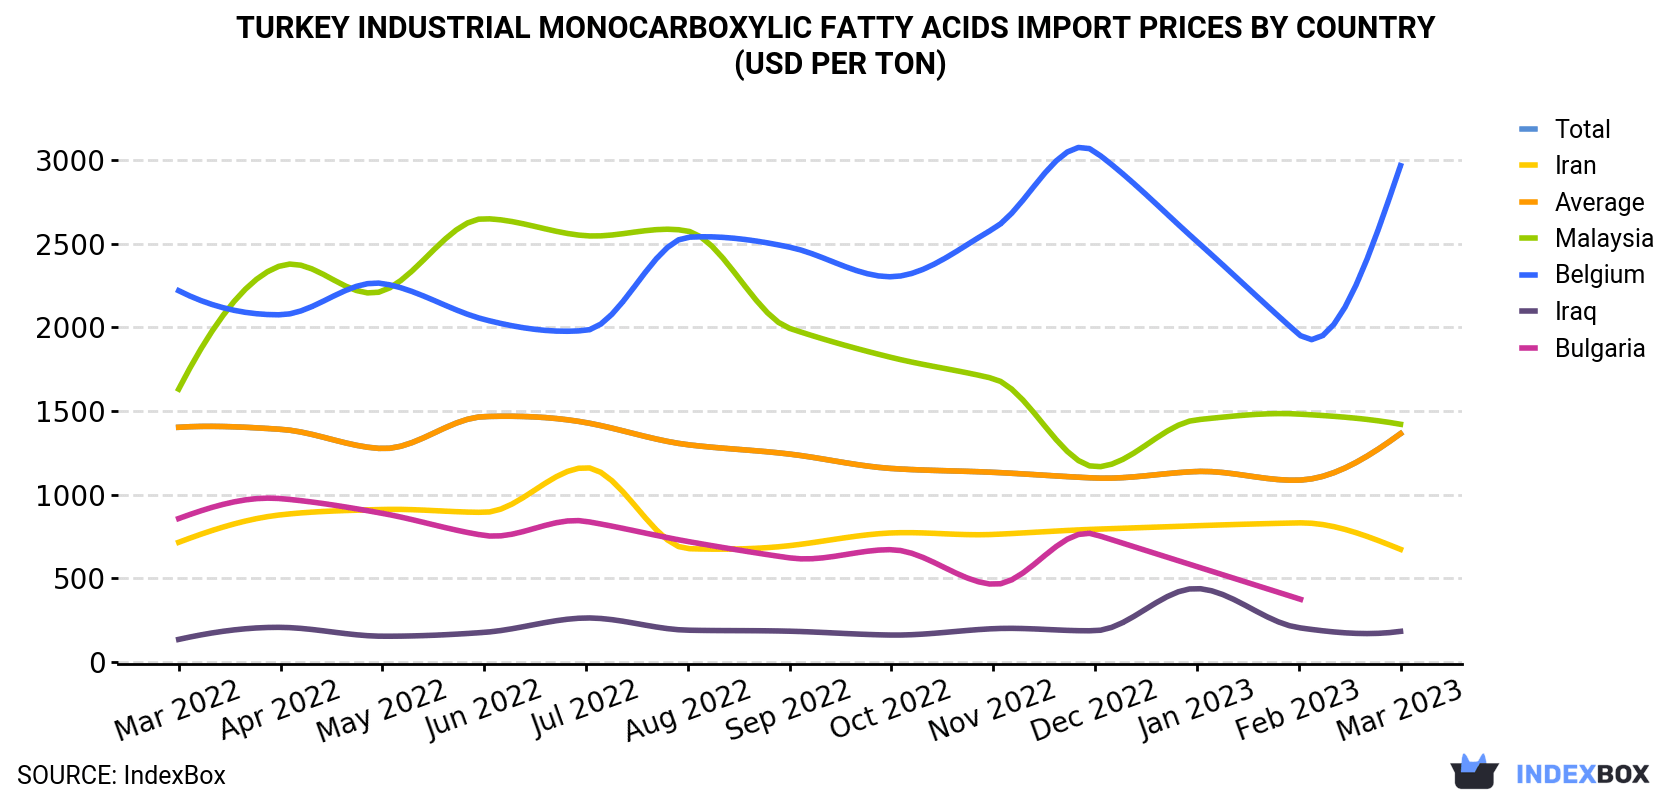 Turkey Industrial Monocarboxylic Fatty Acids Import Prices By Country (USD Per Ton)